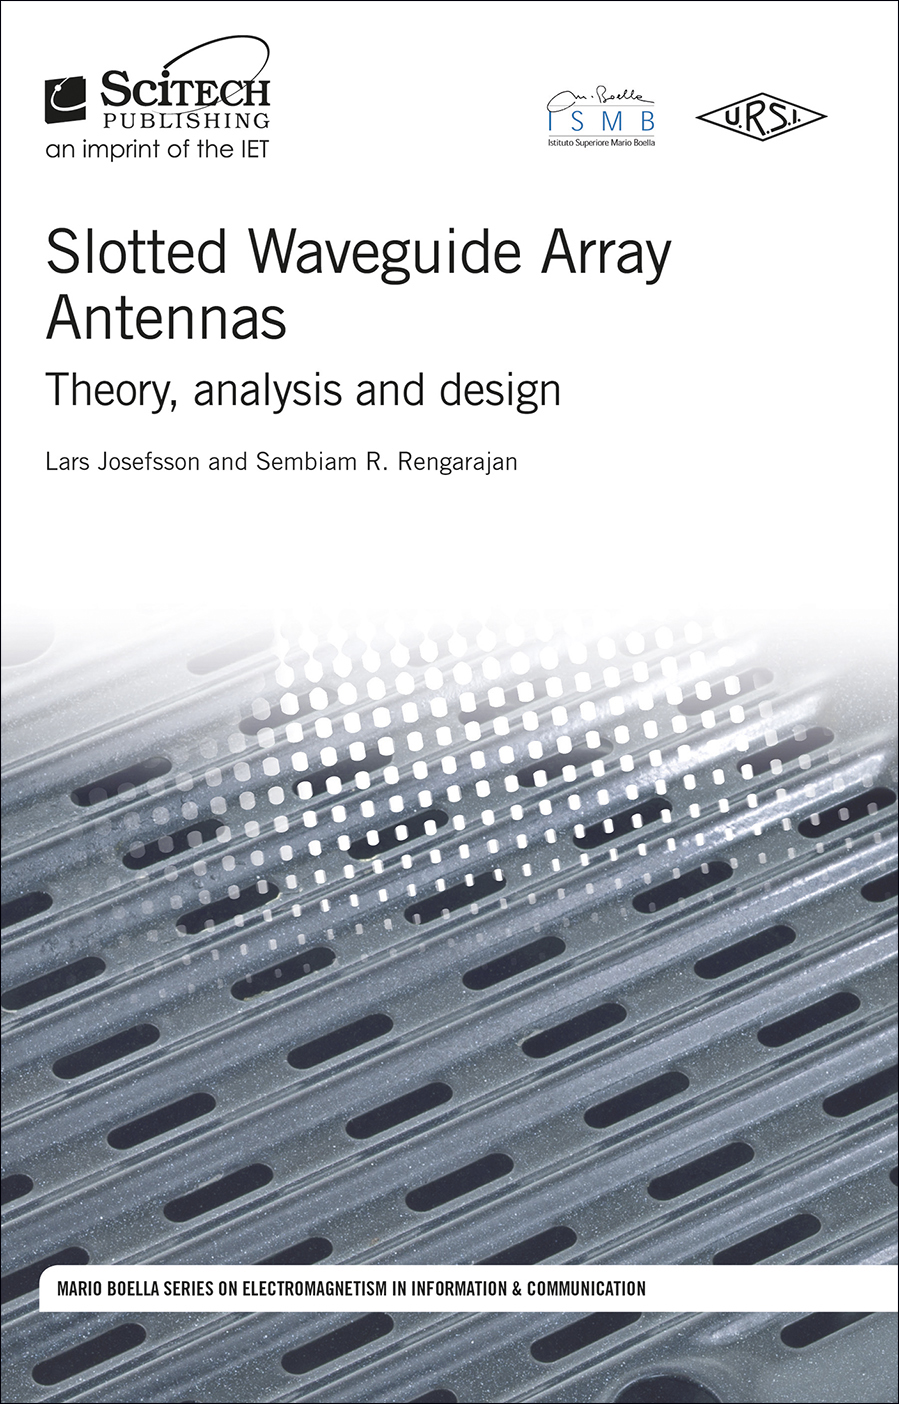 Slotted Waveguide Array Antennas, Theory, analysis and design